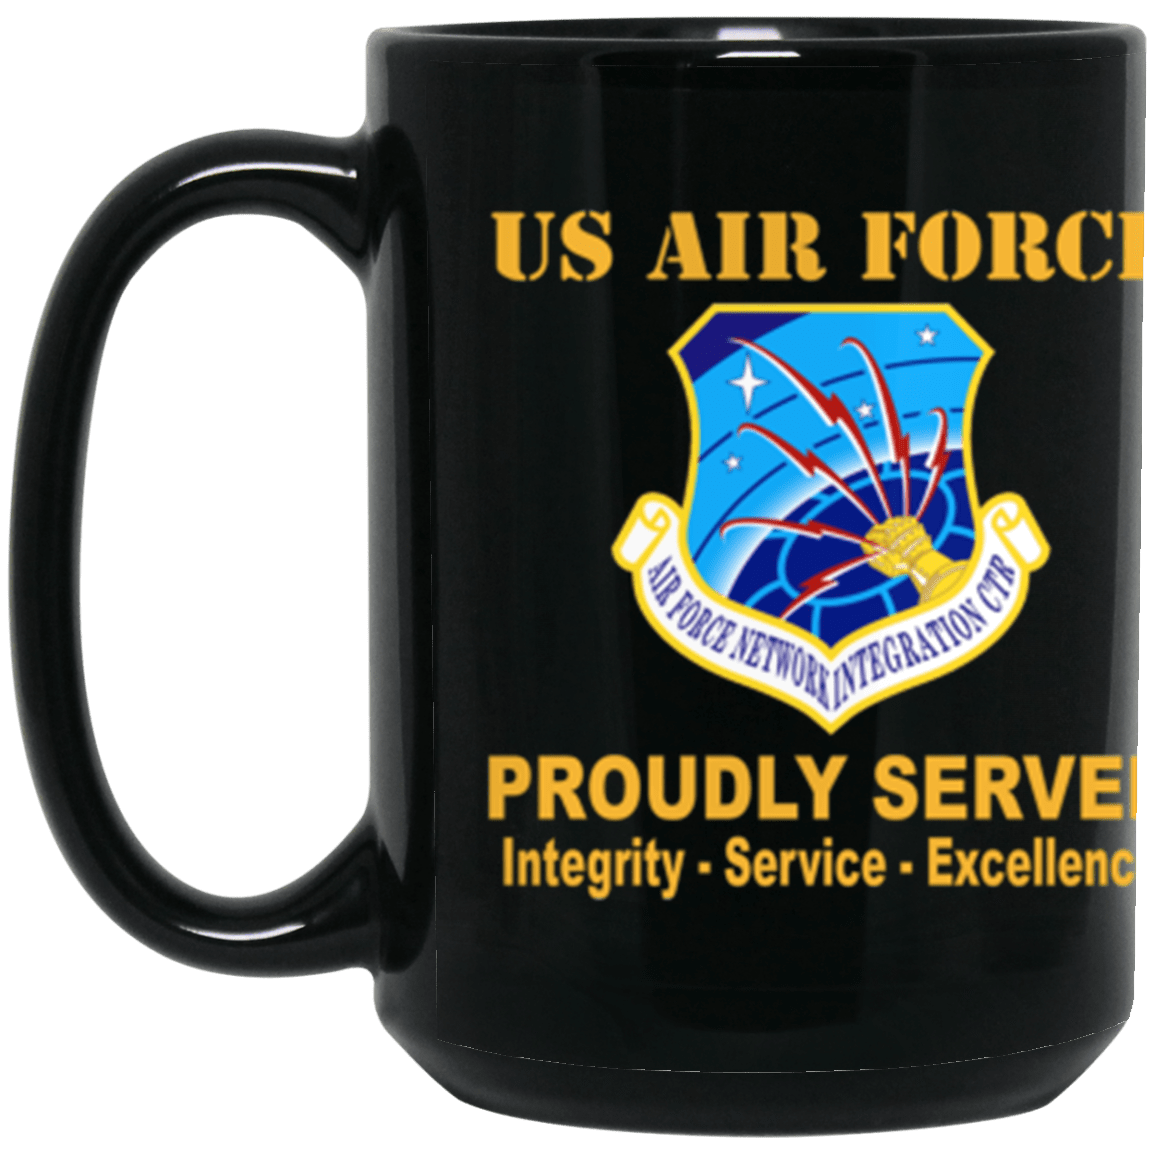 US Air Force Communications Command Proudly Served Core Values 15 oz. Black Mug-Drinkware-Veterans Nation